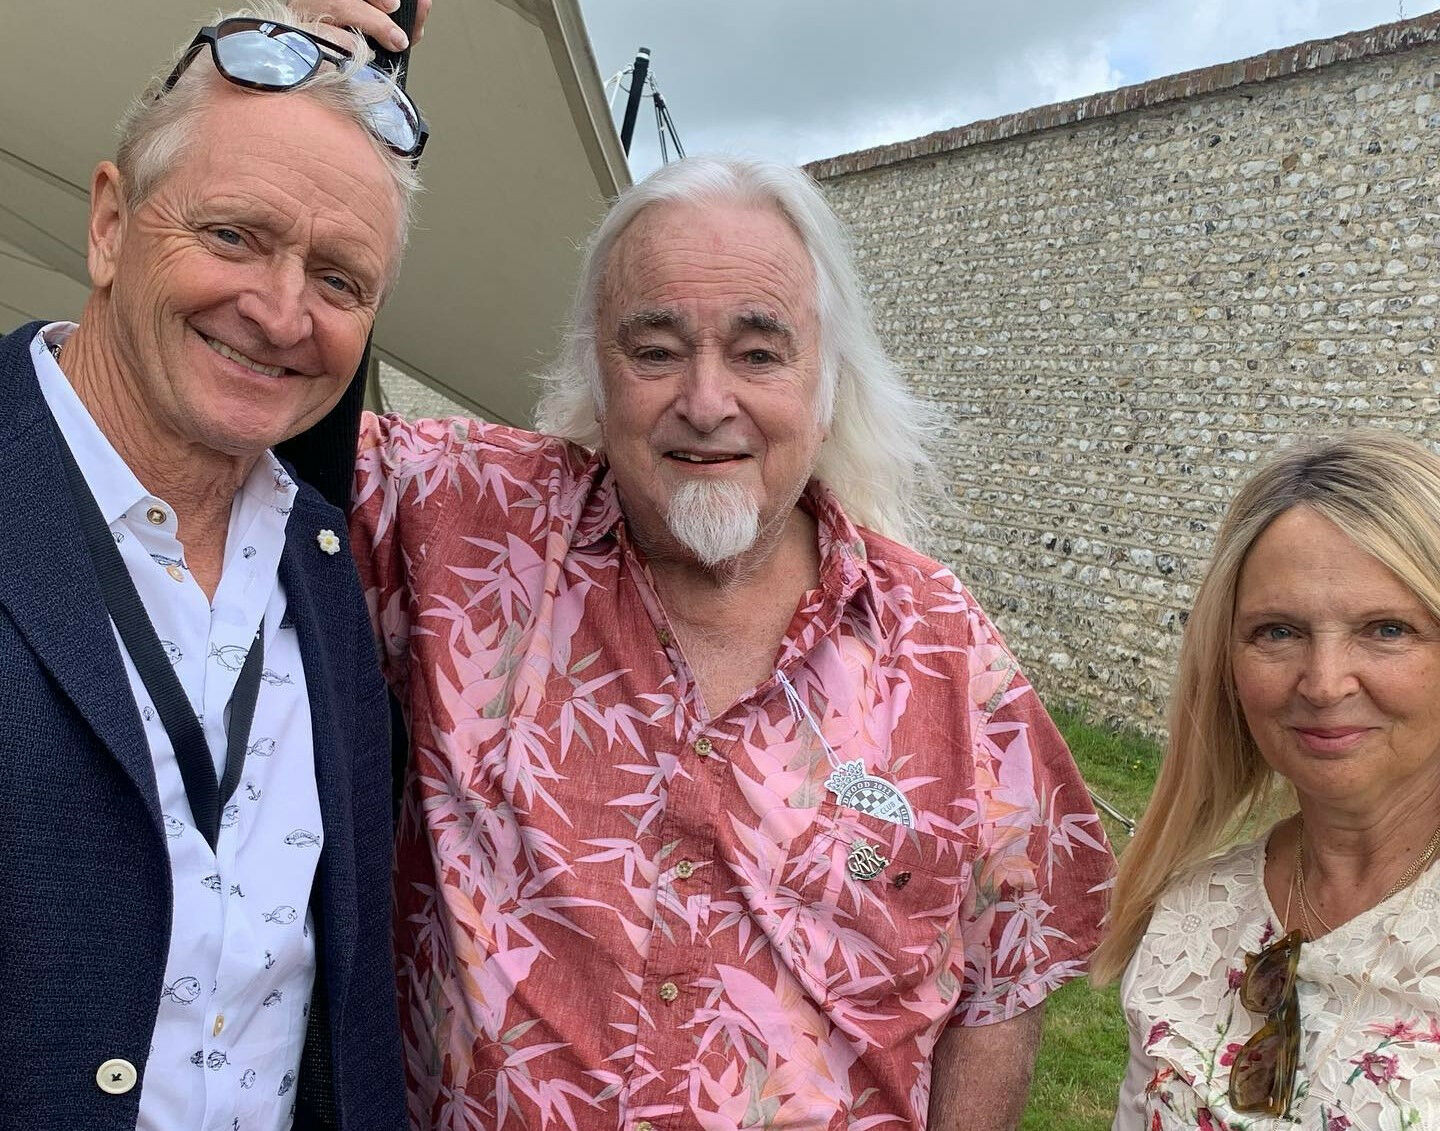 Kevin Schwantz (left) with Garry Taylor (center) and Garry's wife Kate (right) at the Goodwood Festival of Speed in 2022. Photo courtesy Kevin Schwantz.